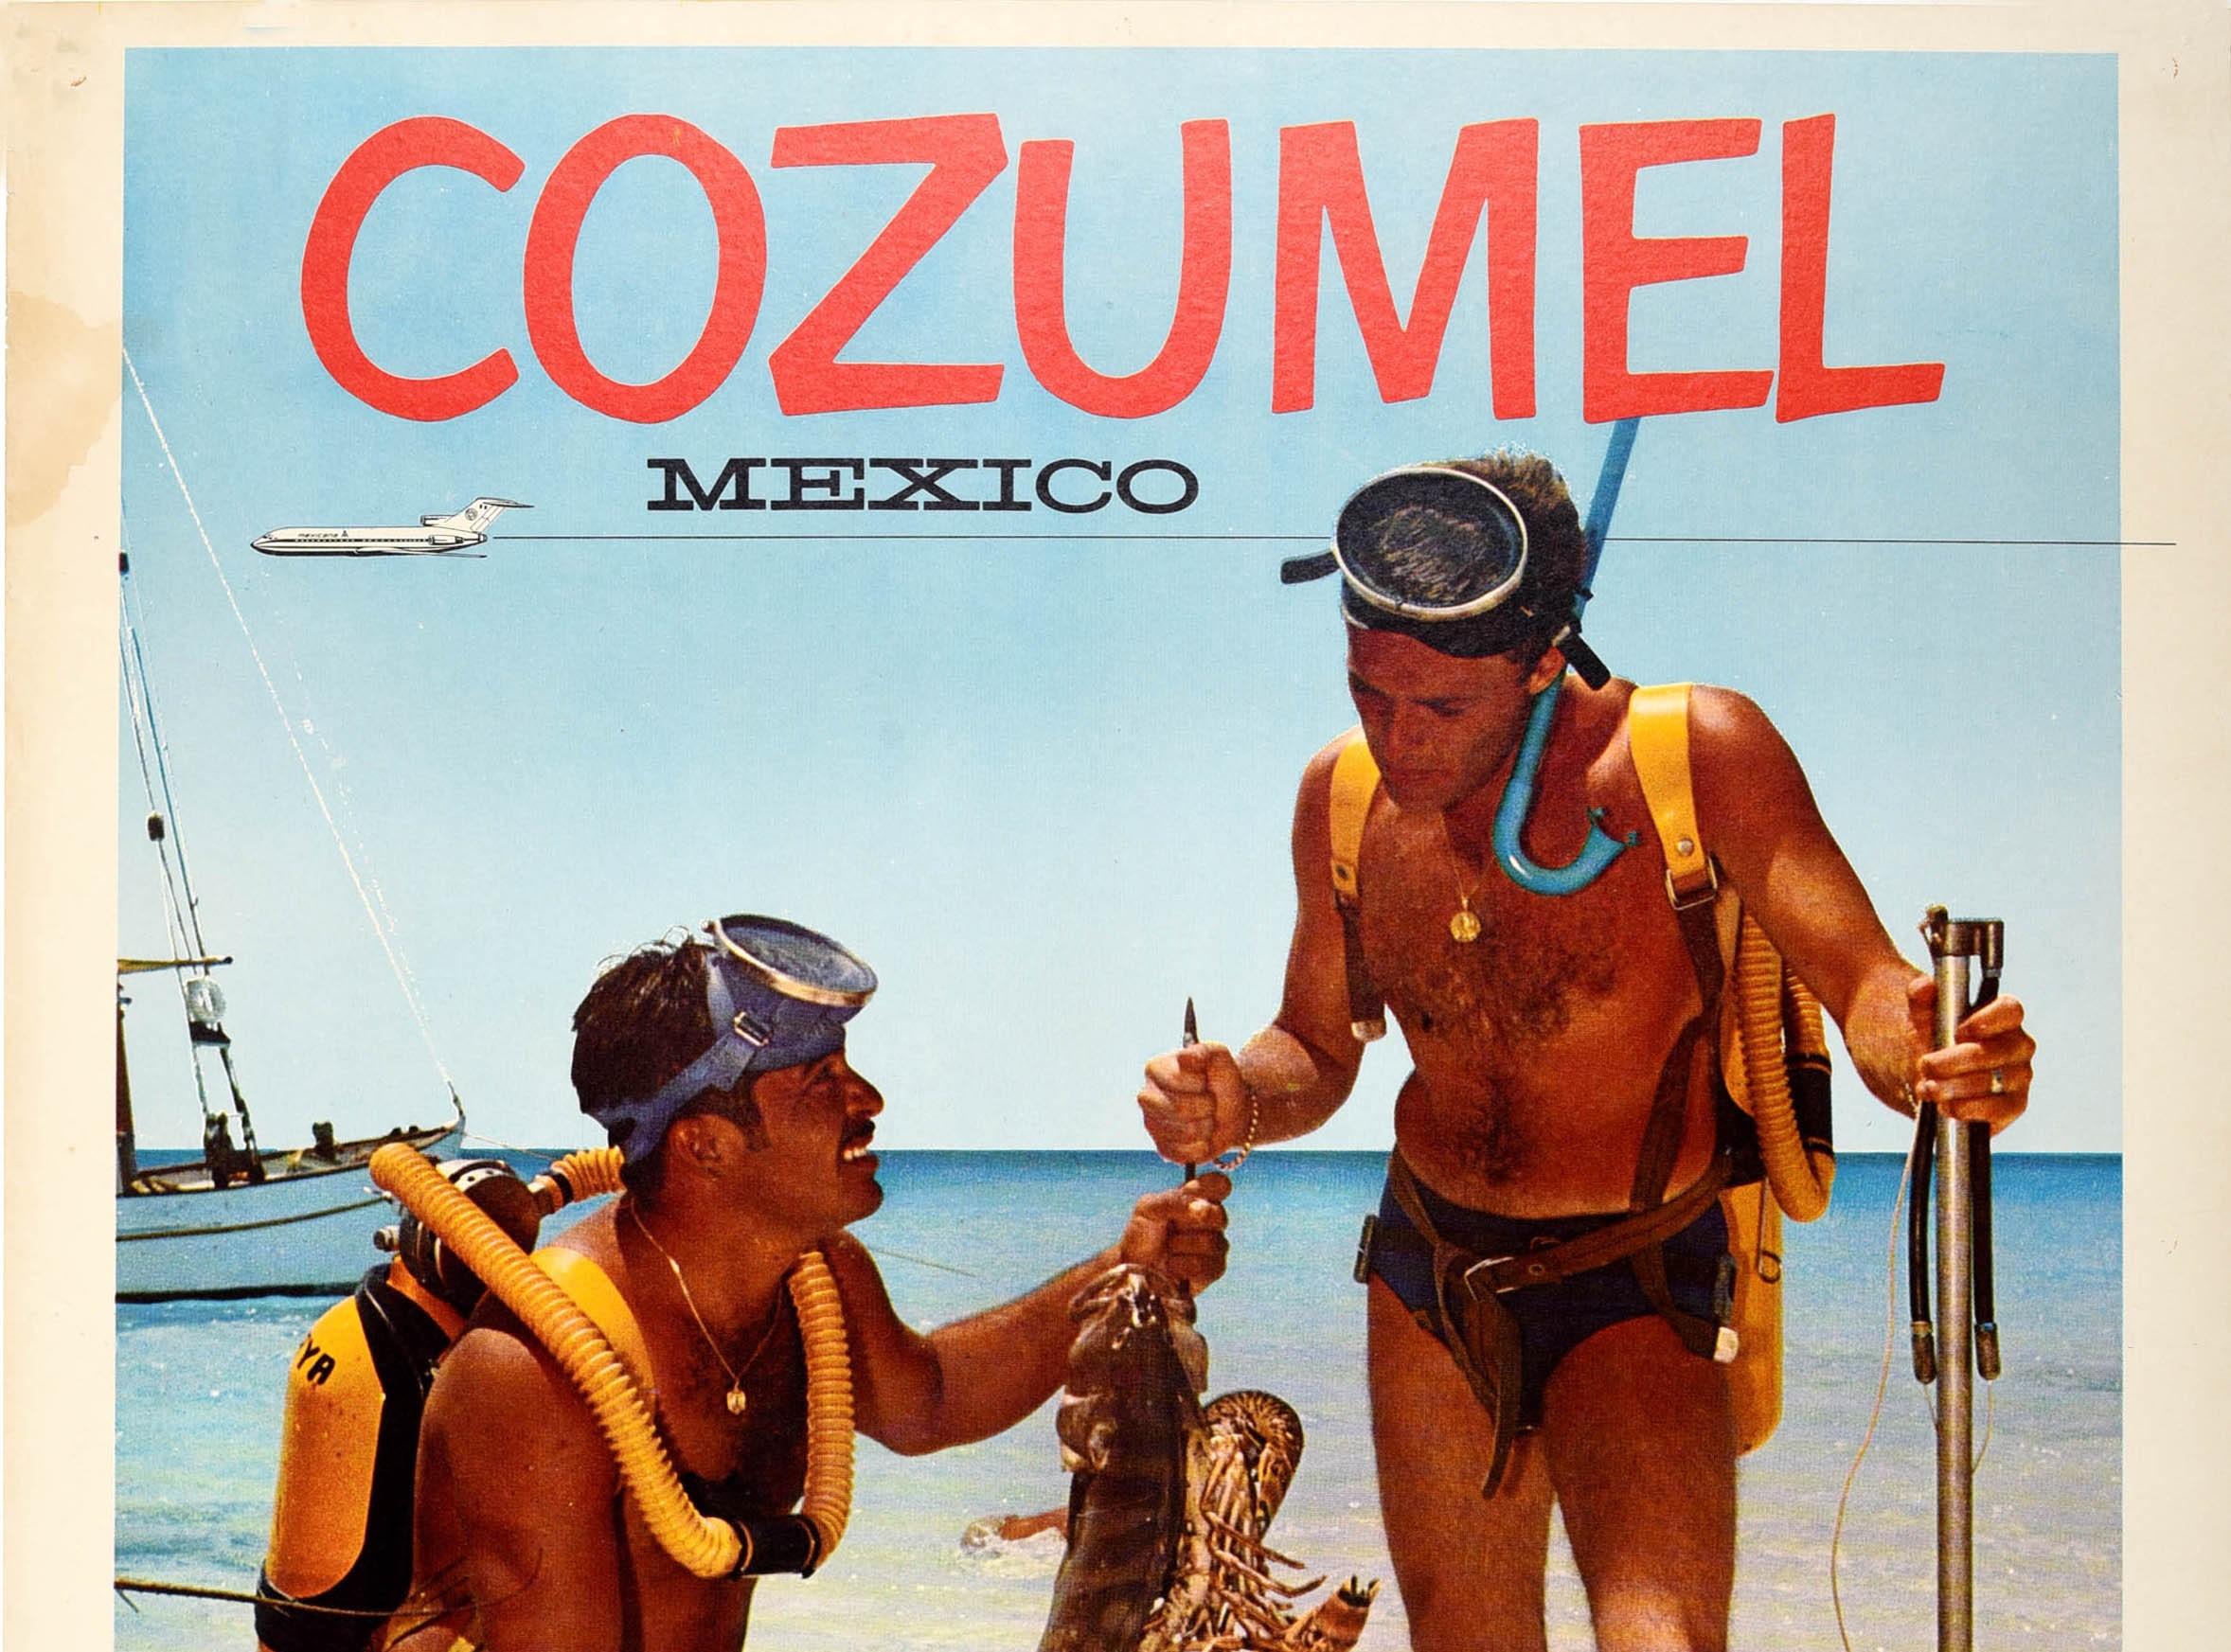 Original Vintage Air Travel Poster Cozumel Mexico Mexicana Scuba Diving Fishing - Print by Unknown